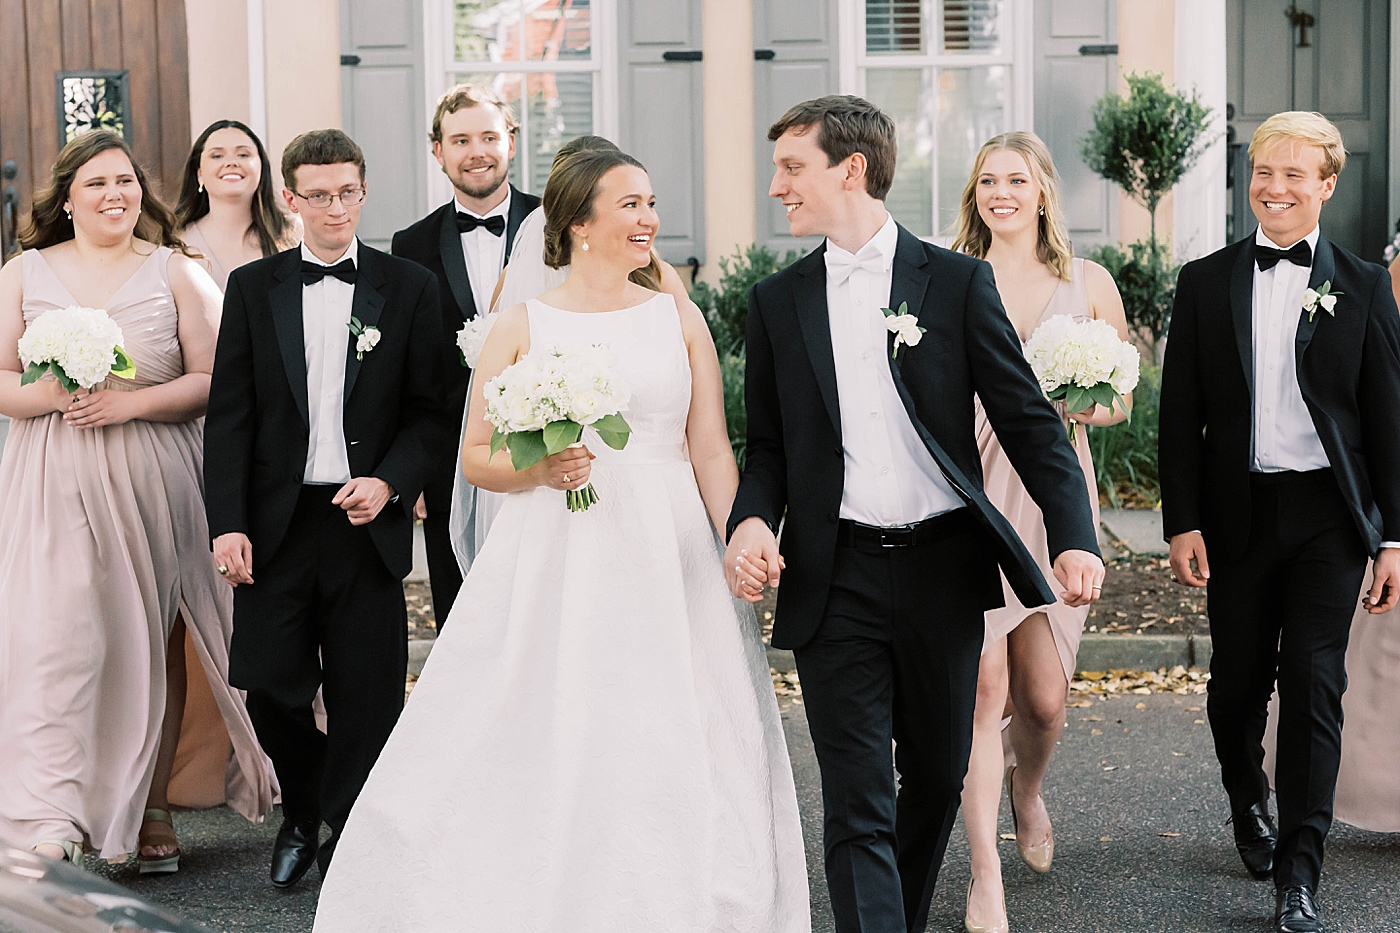 Bride and groom with their wedding party during their Intimate spring wedding | Carters Event Co